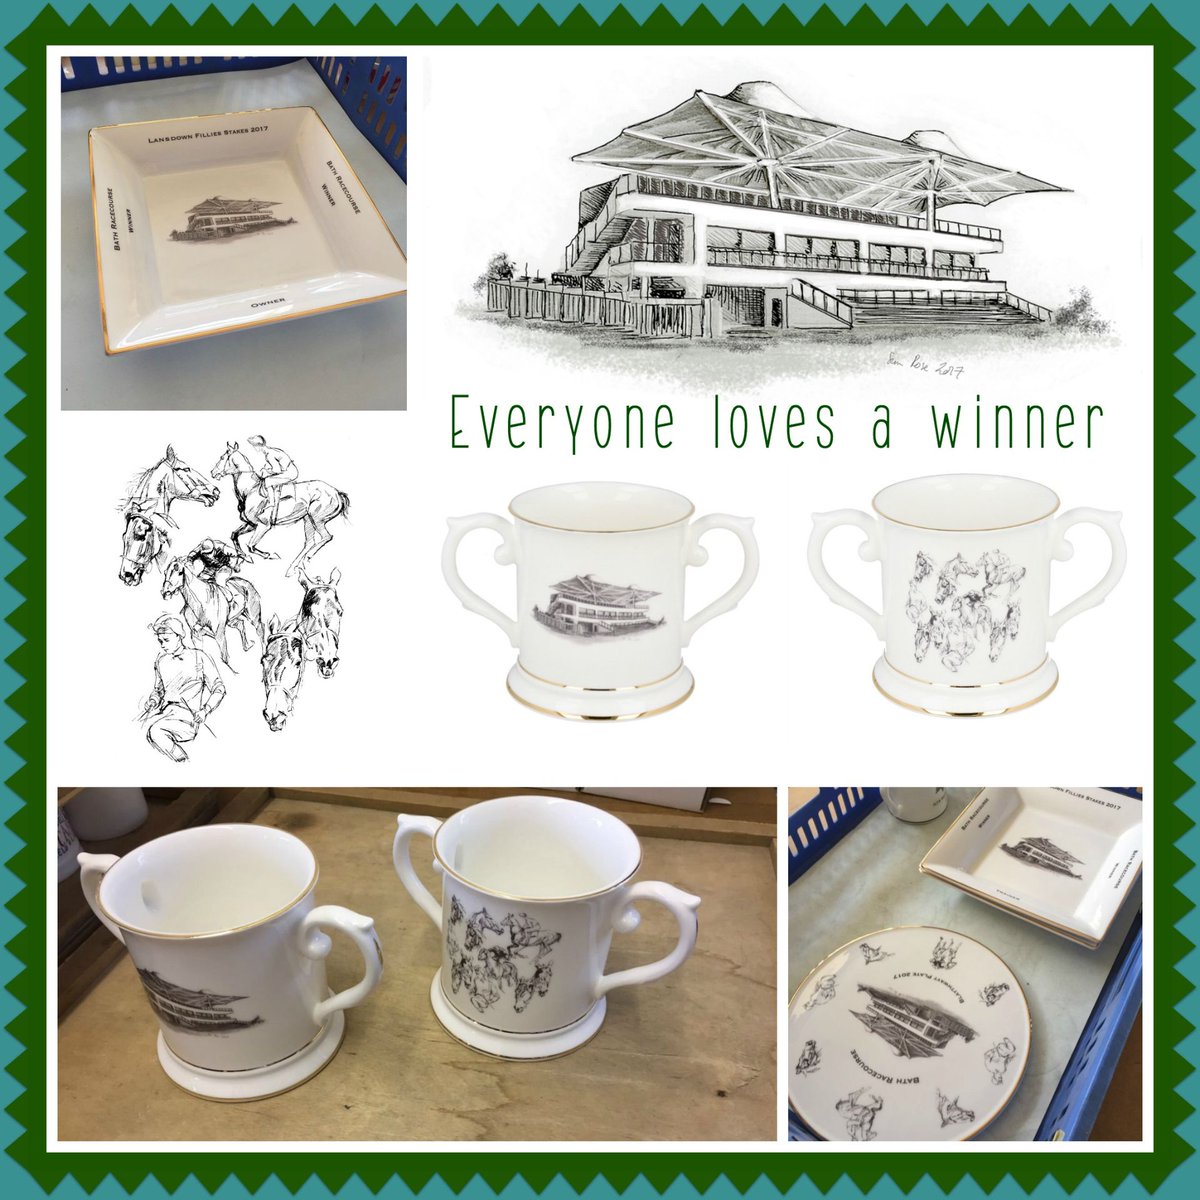 We are a small determined British business specialising in producing a range of handmade English bone china gifts designed by me & produced in our small but perfectly formed Longton workshop in the heart of Stoke #UkBusinessHour #b2b
 susanrosechina.co.uk/corporate-gift…